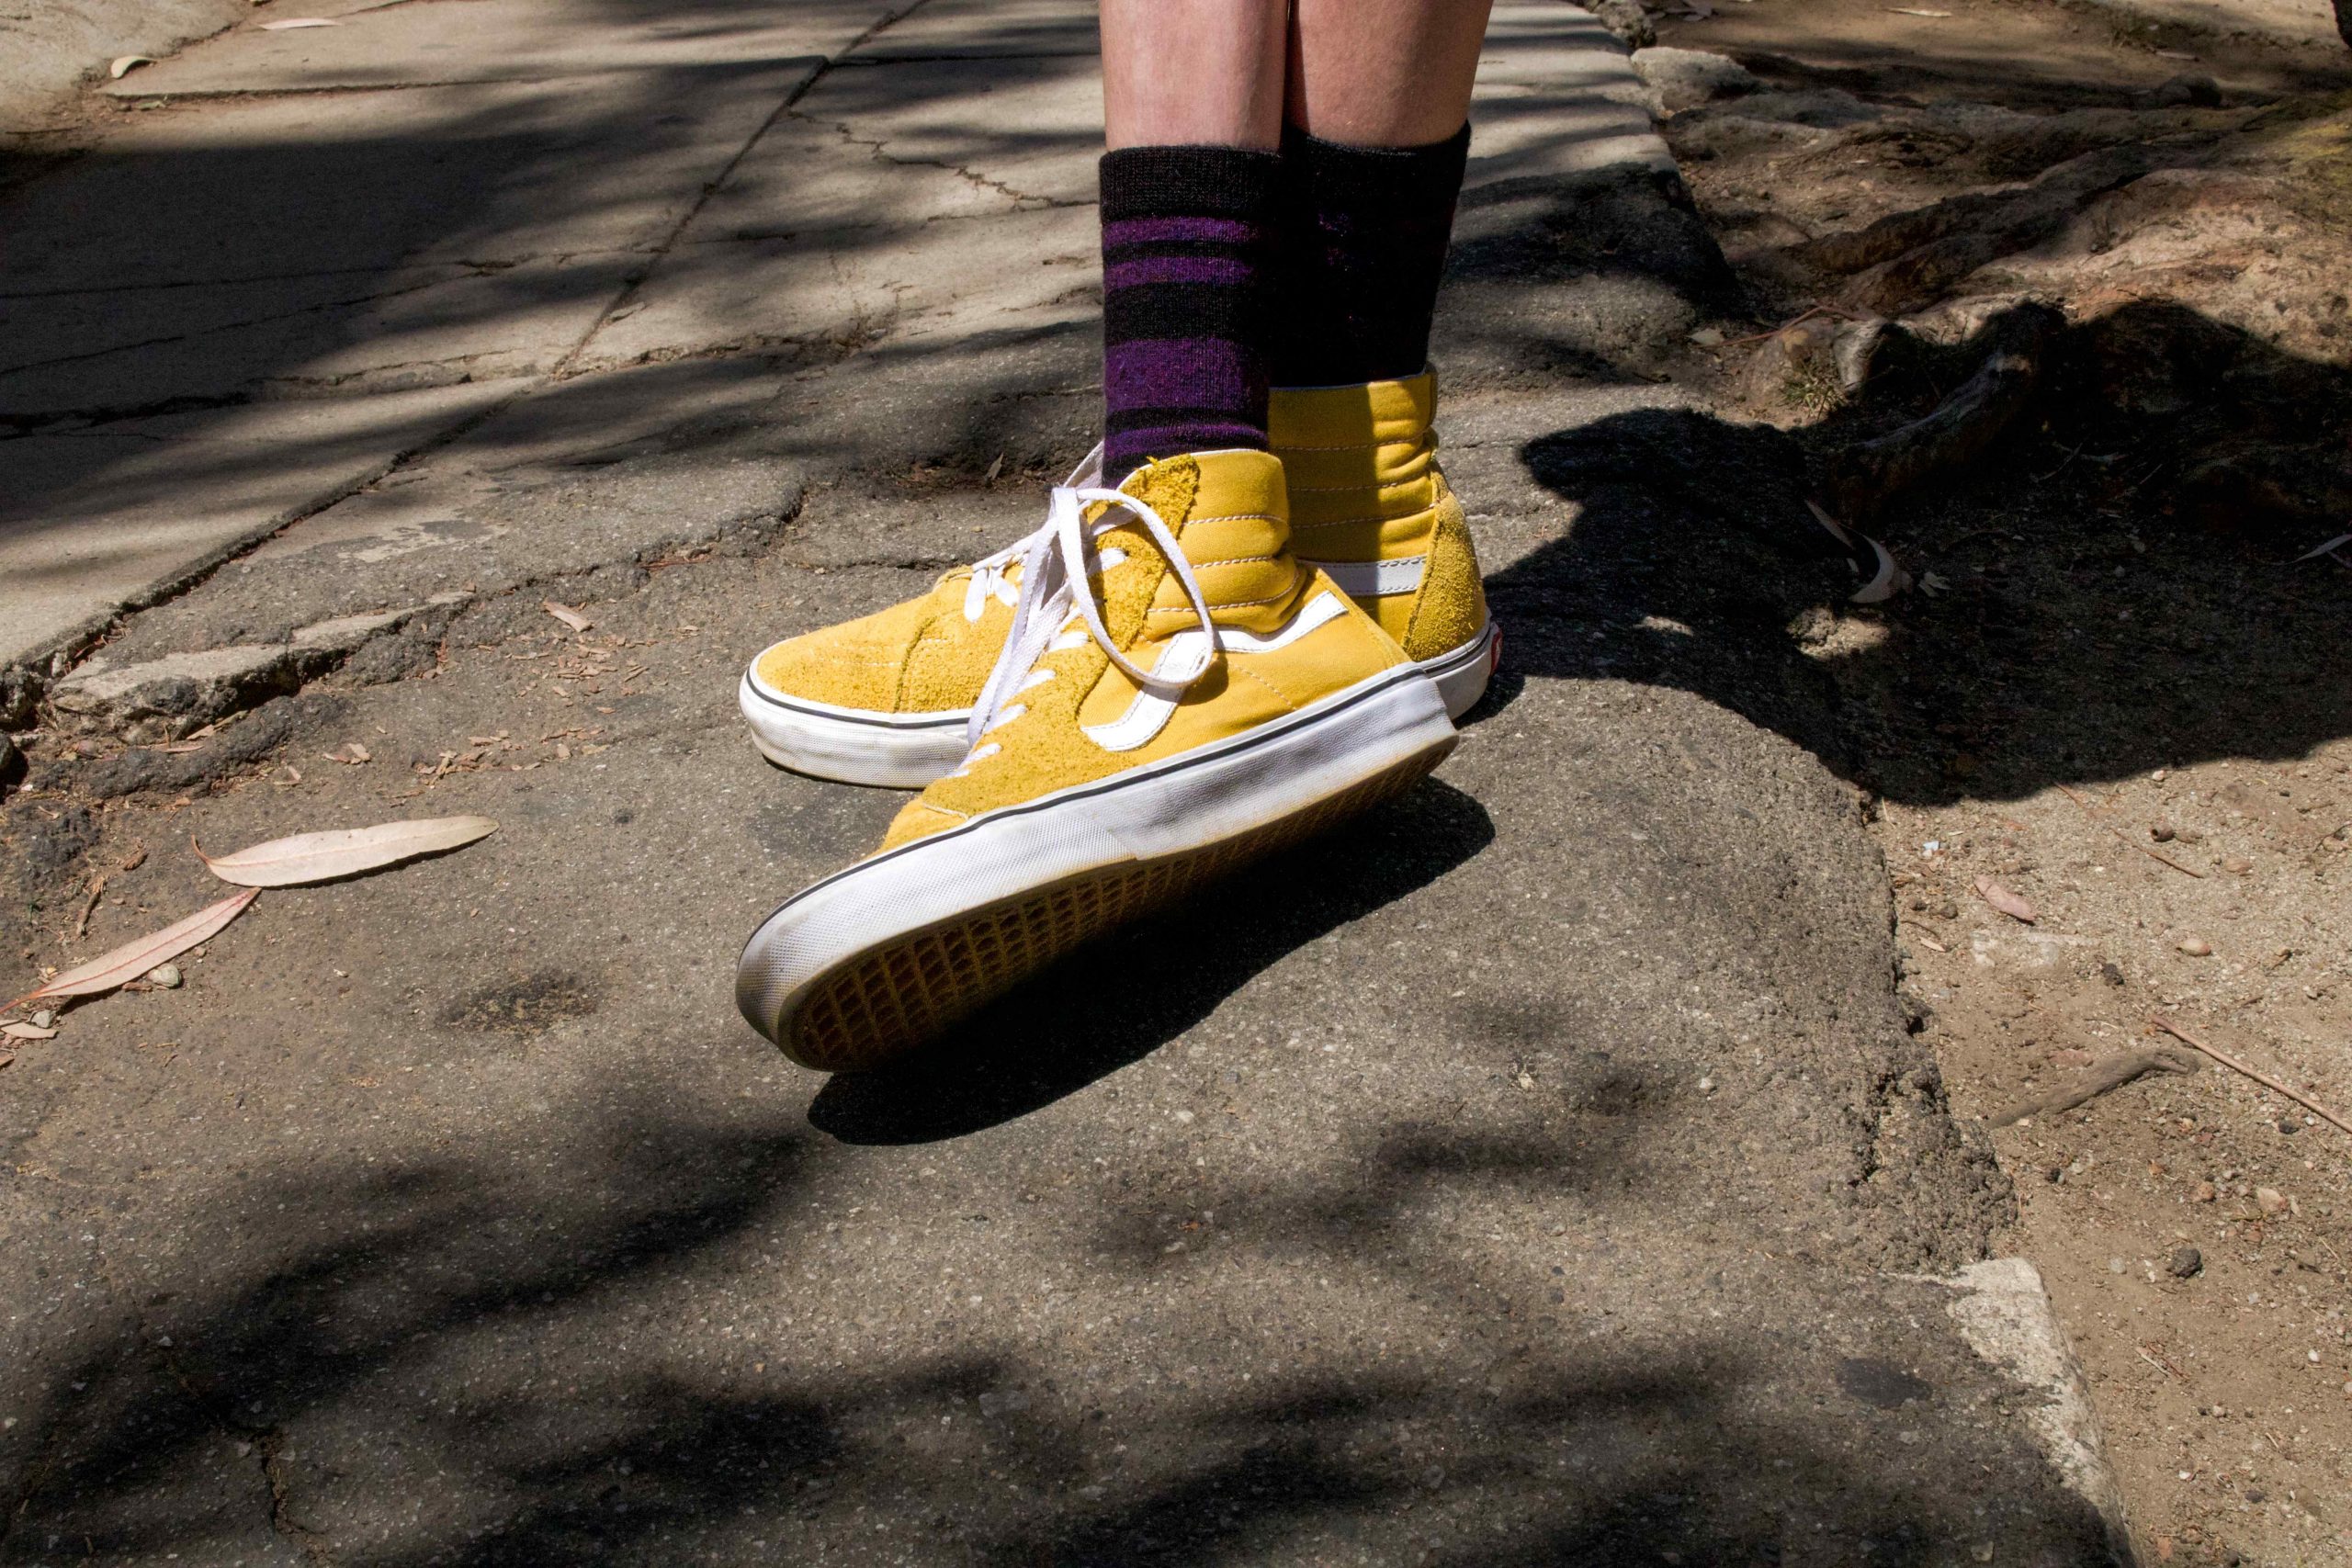 A photograph of yellow sneakers with red and black socks.